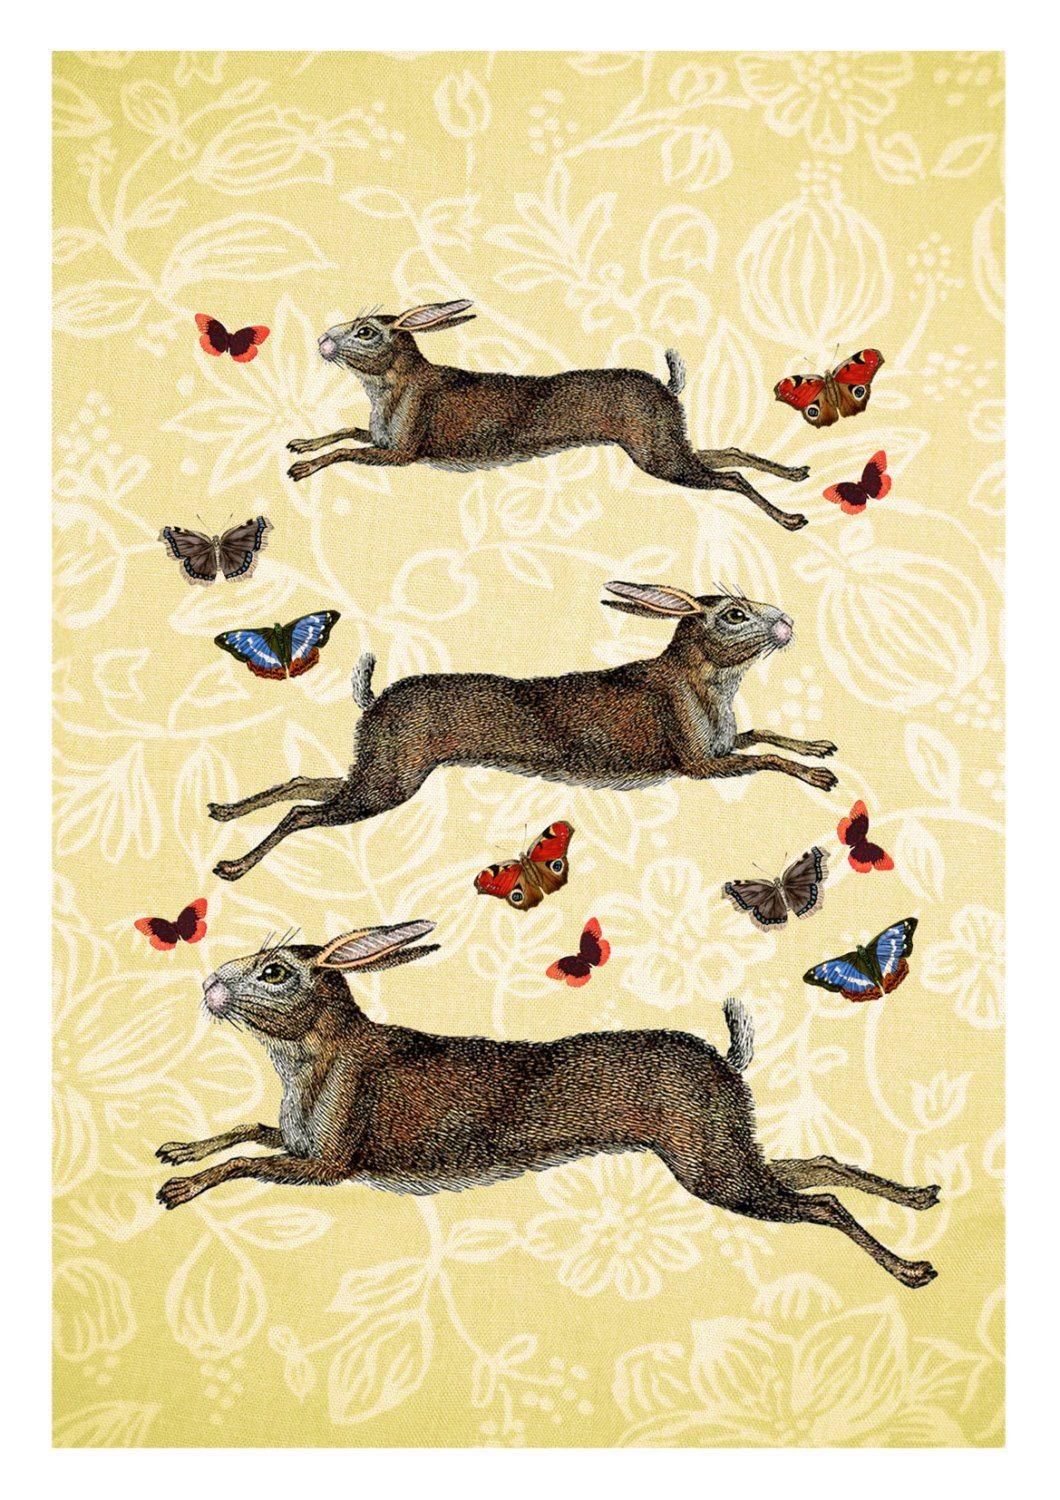 HARES & BUTTERFLIES PRINT: Vintage March Hares Leaping - Pimlico Prints